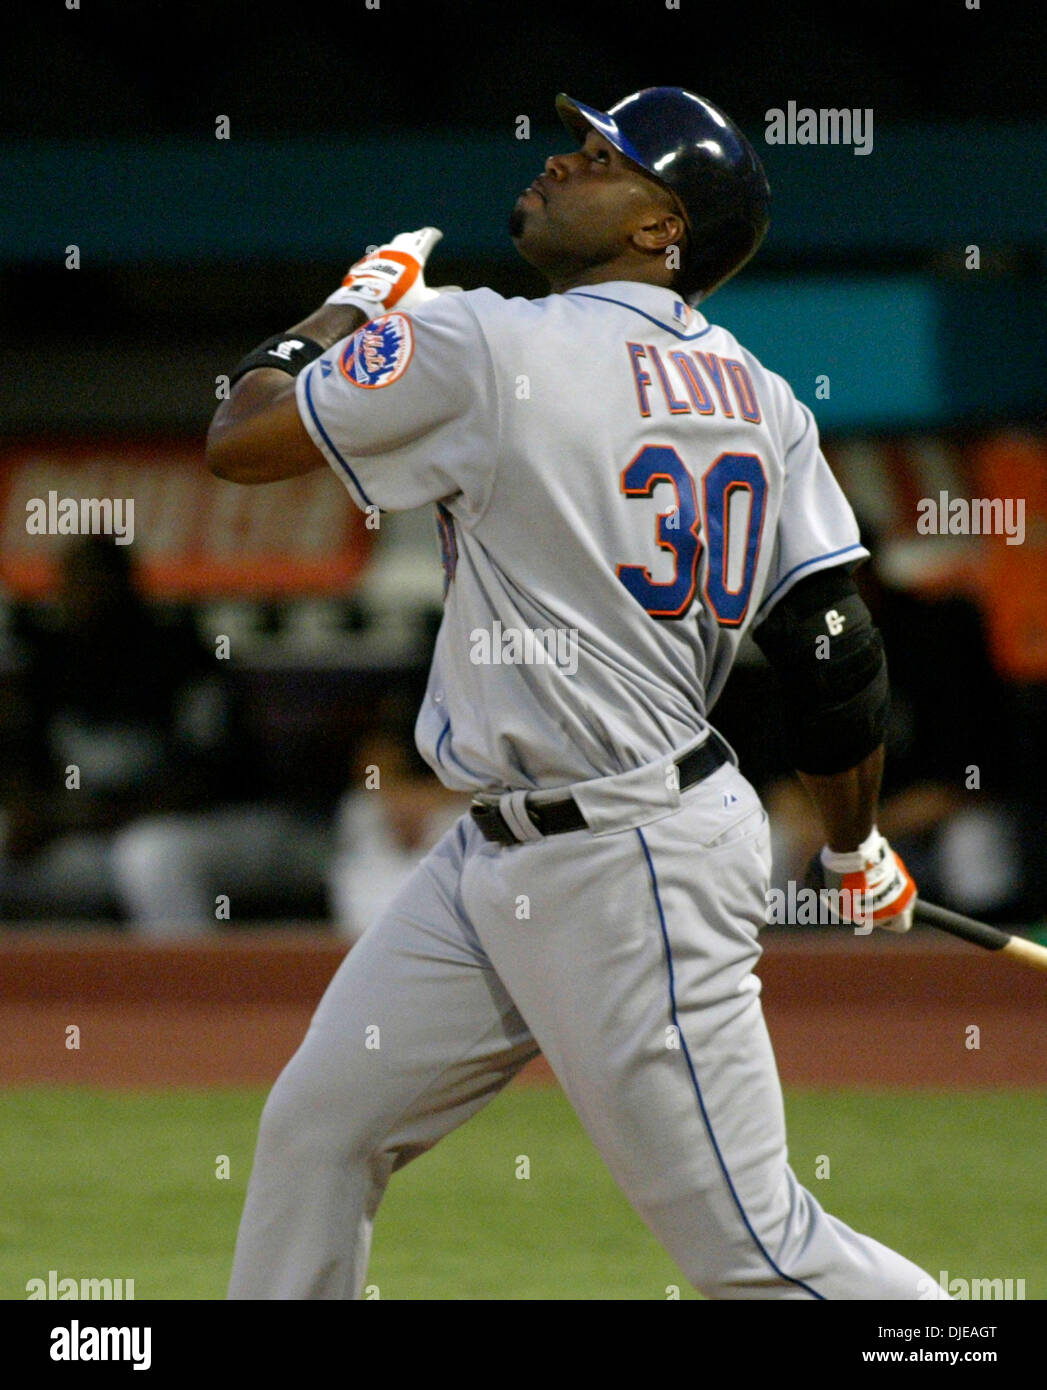 Jul 10, 2004; Miami, FL, USA; New York Mets' left fielder CLIFF FLOYD flies  out to left field in the 7th inning during the New York Mets v.Florida Marlins  baseball game, Saturday